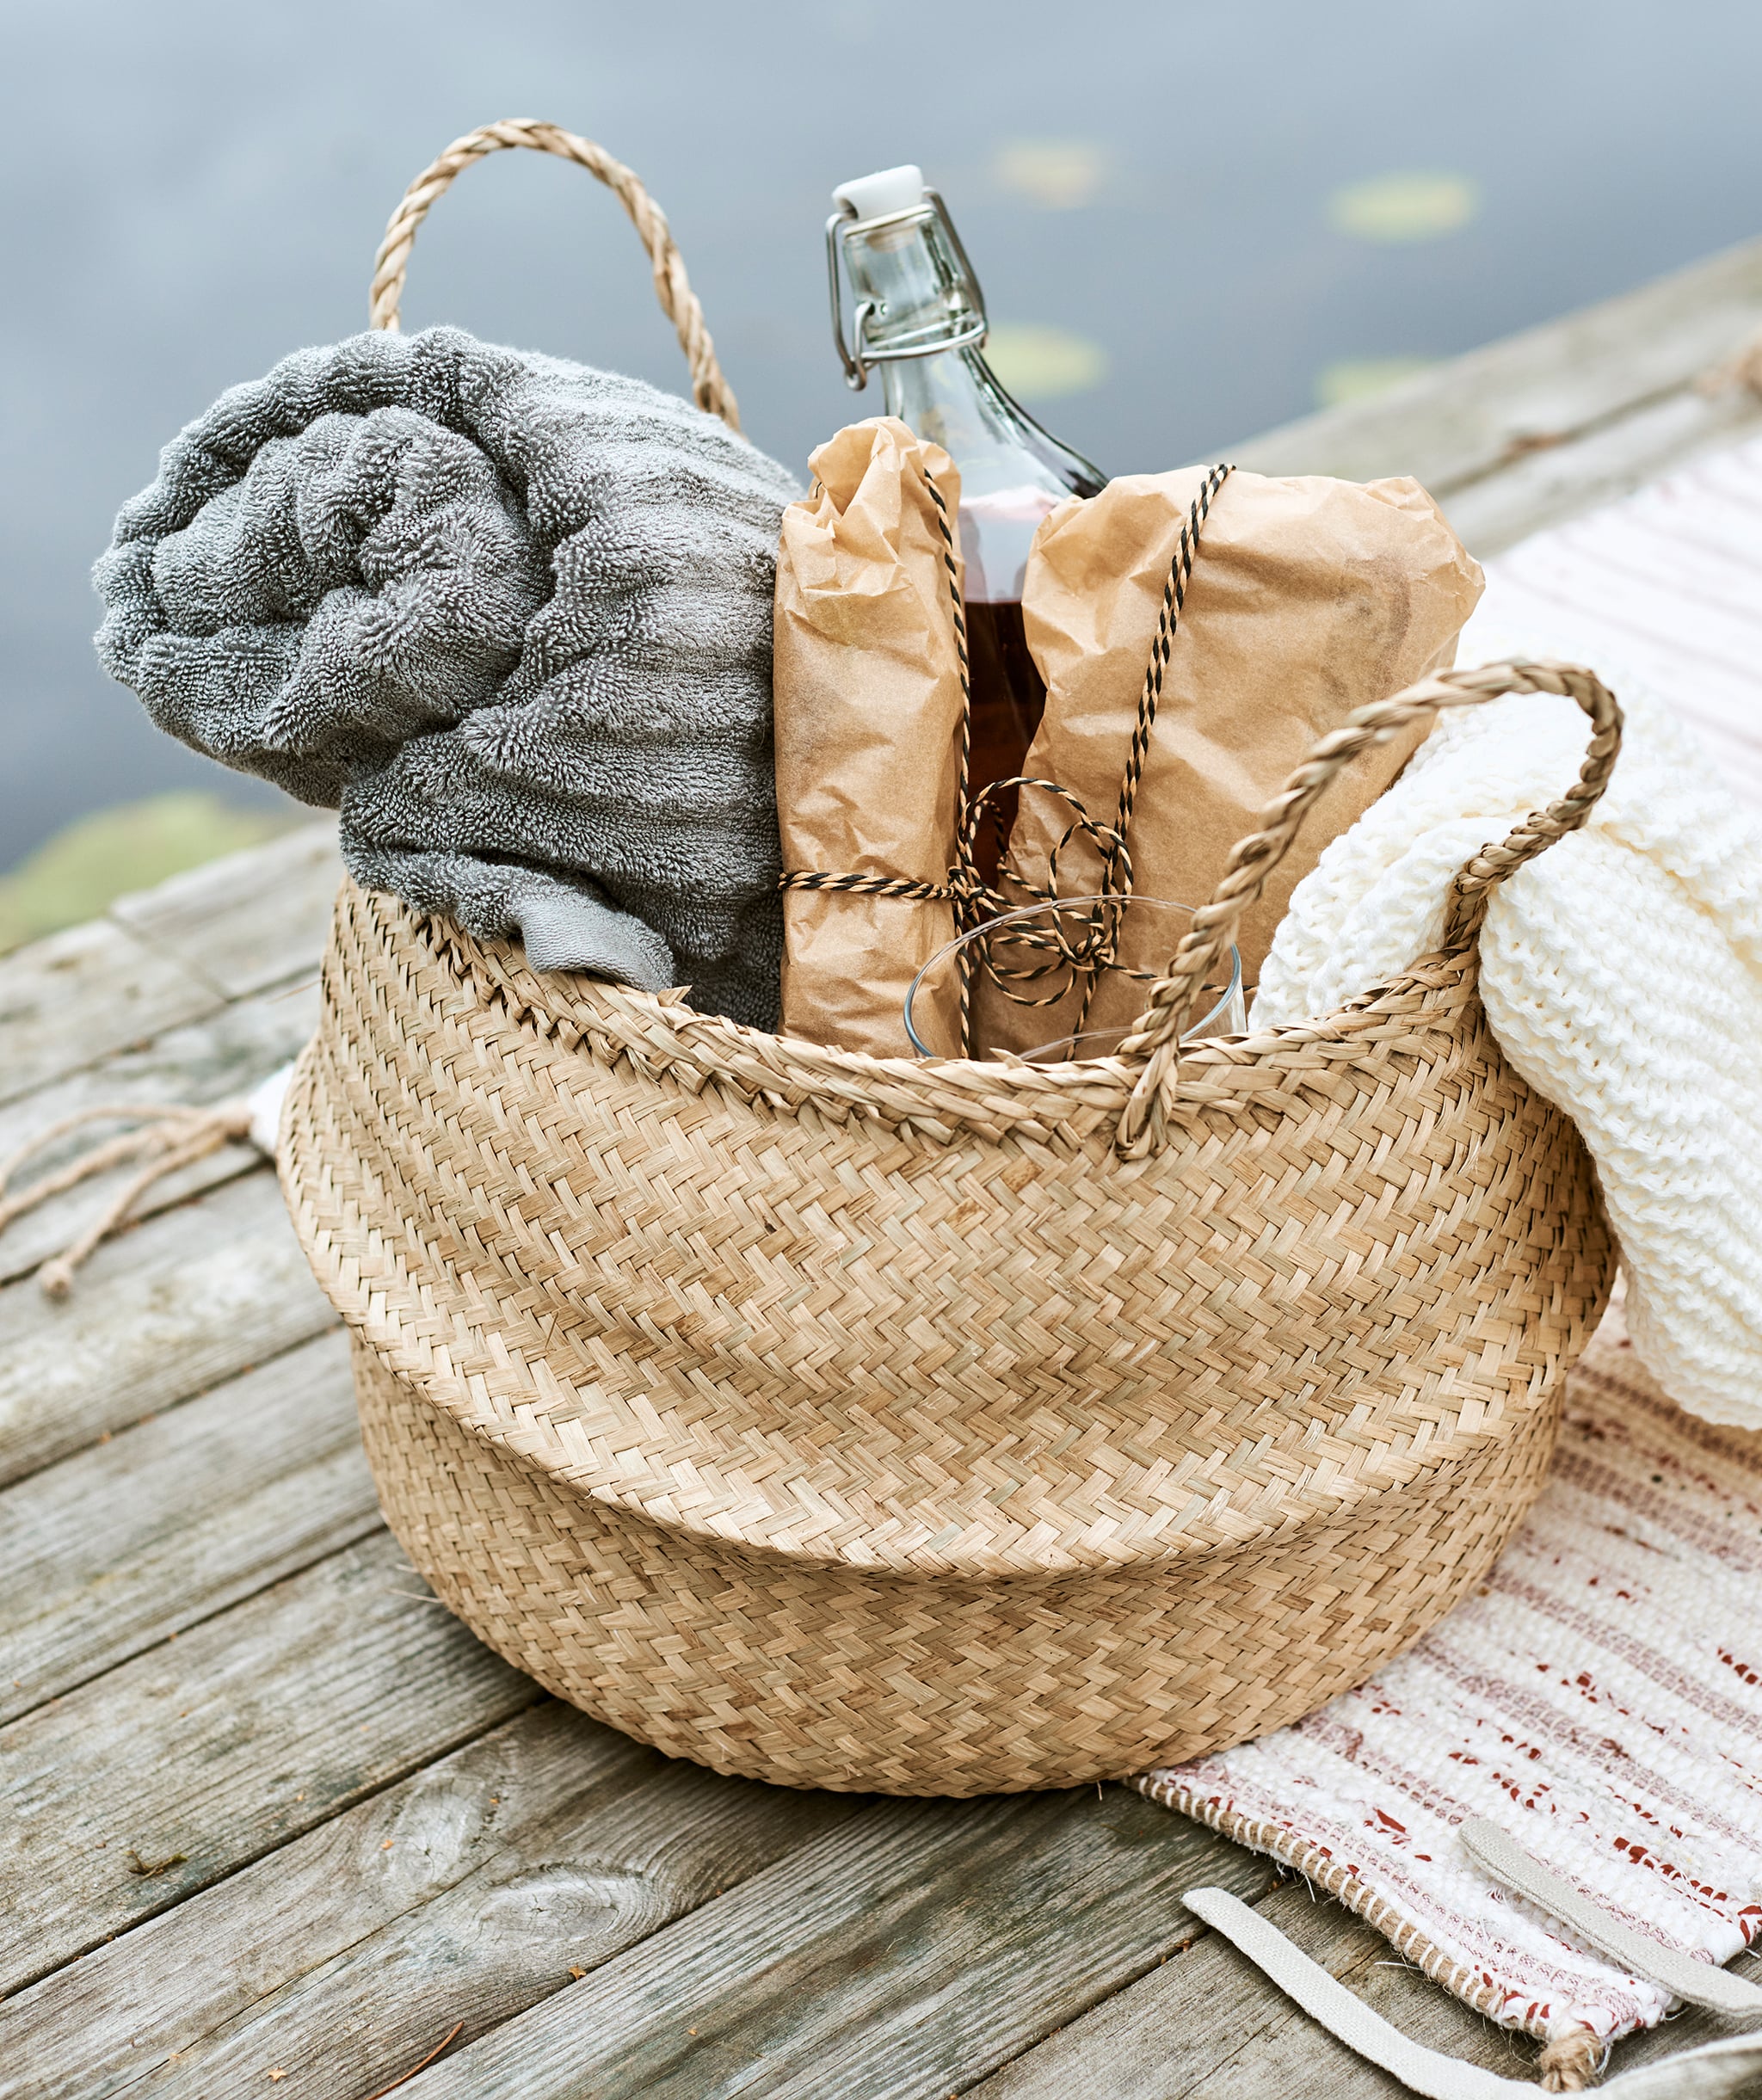 A woven basket packed for a picnic with rolled-up grey towel, sandwiches wrapped in paper, a cream throw and bottle of drink.